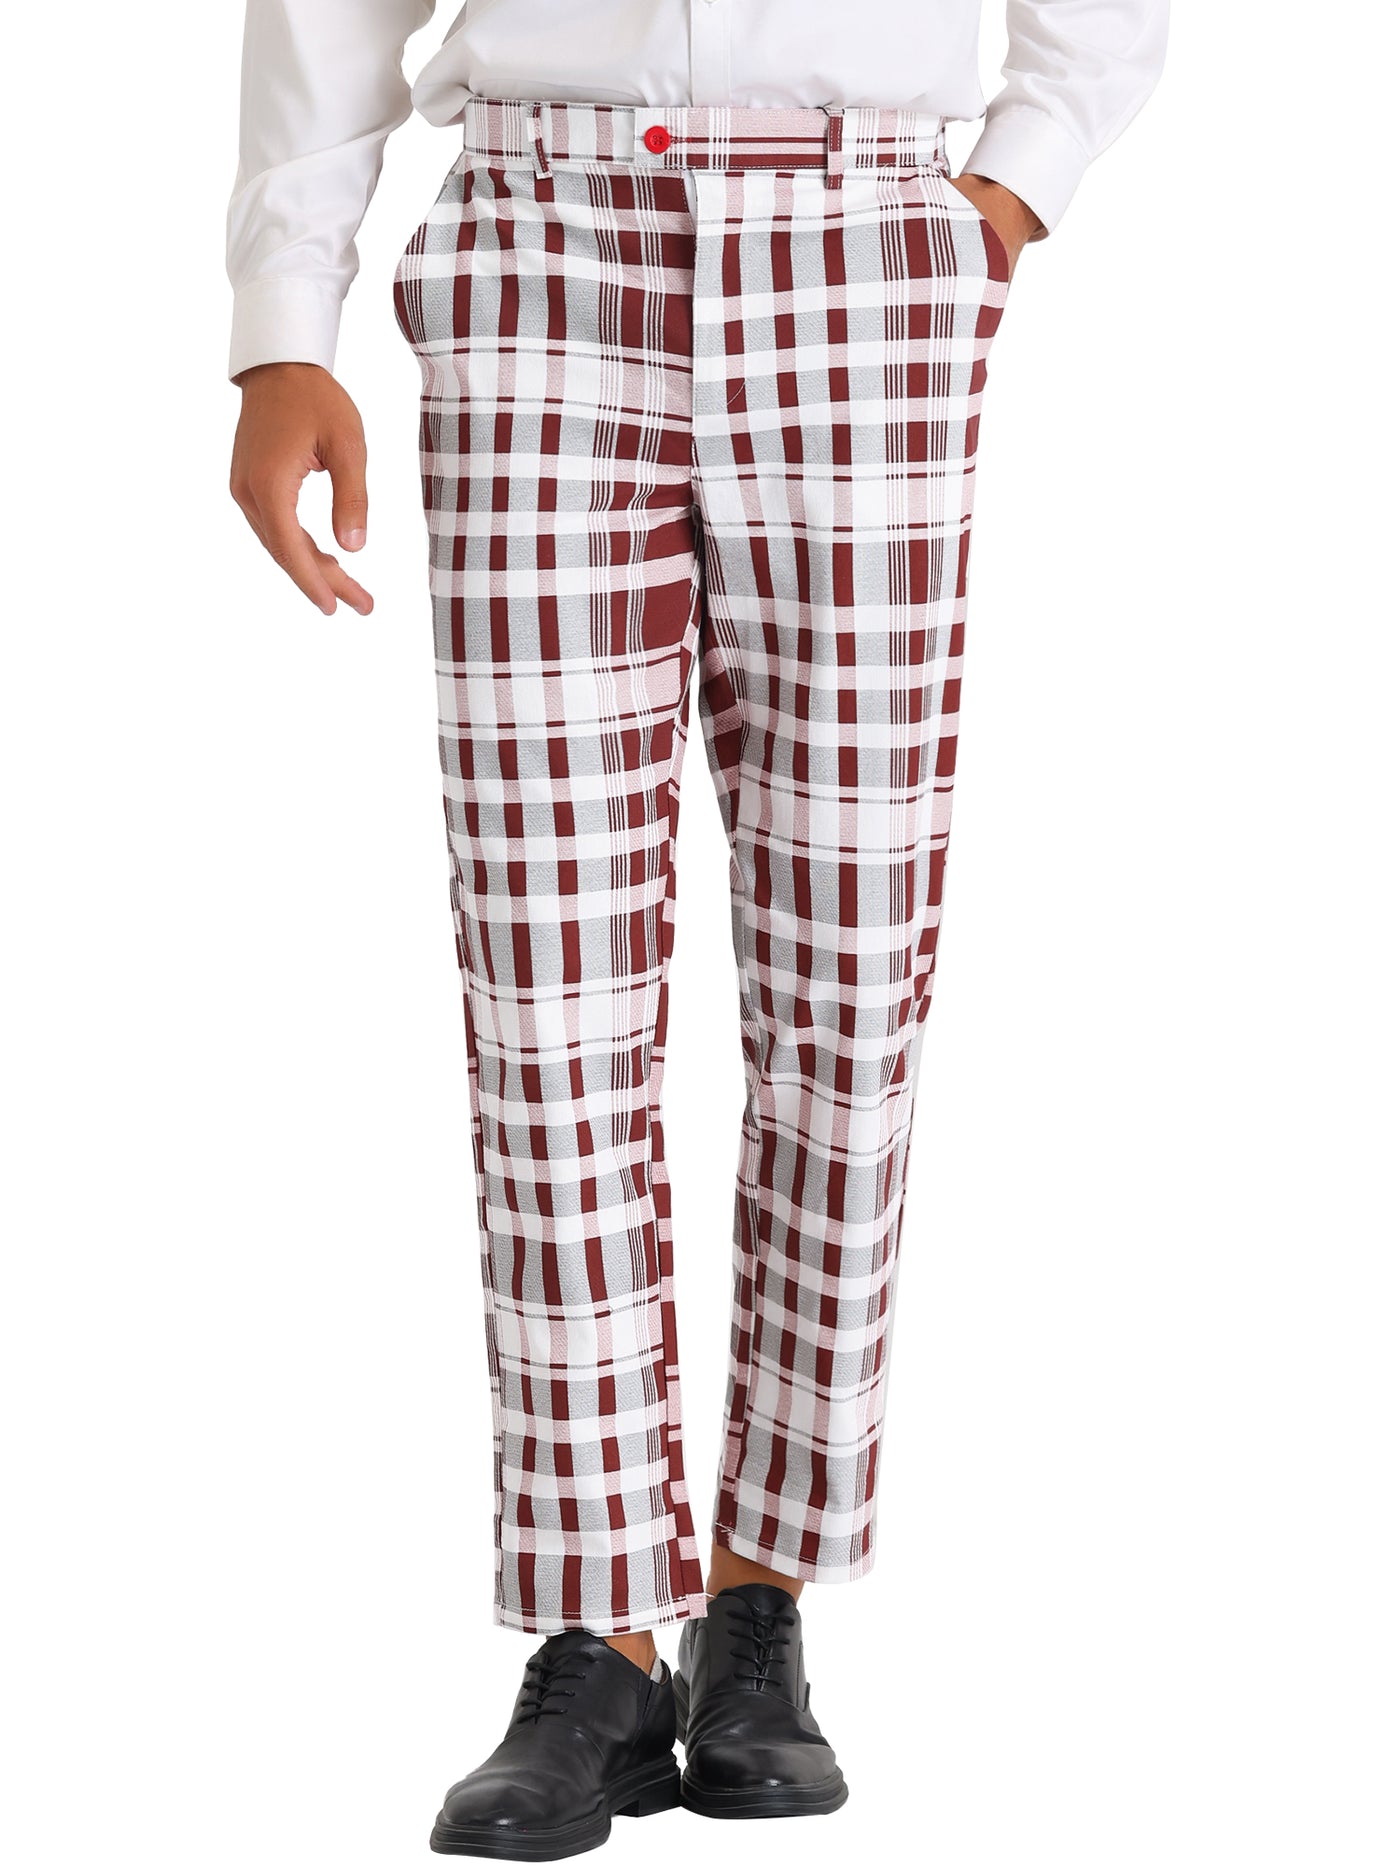 Bublédon Plaid Dress Pants for Men's Slim Fit Flat Front Stretch Tapered Checked Trousers